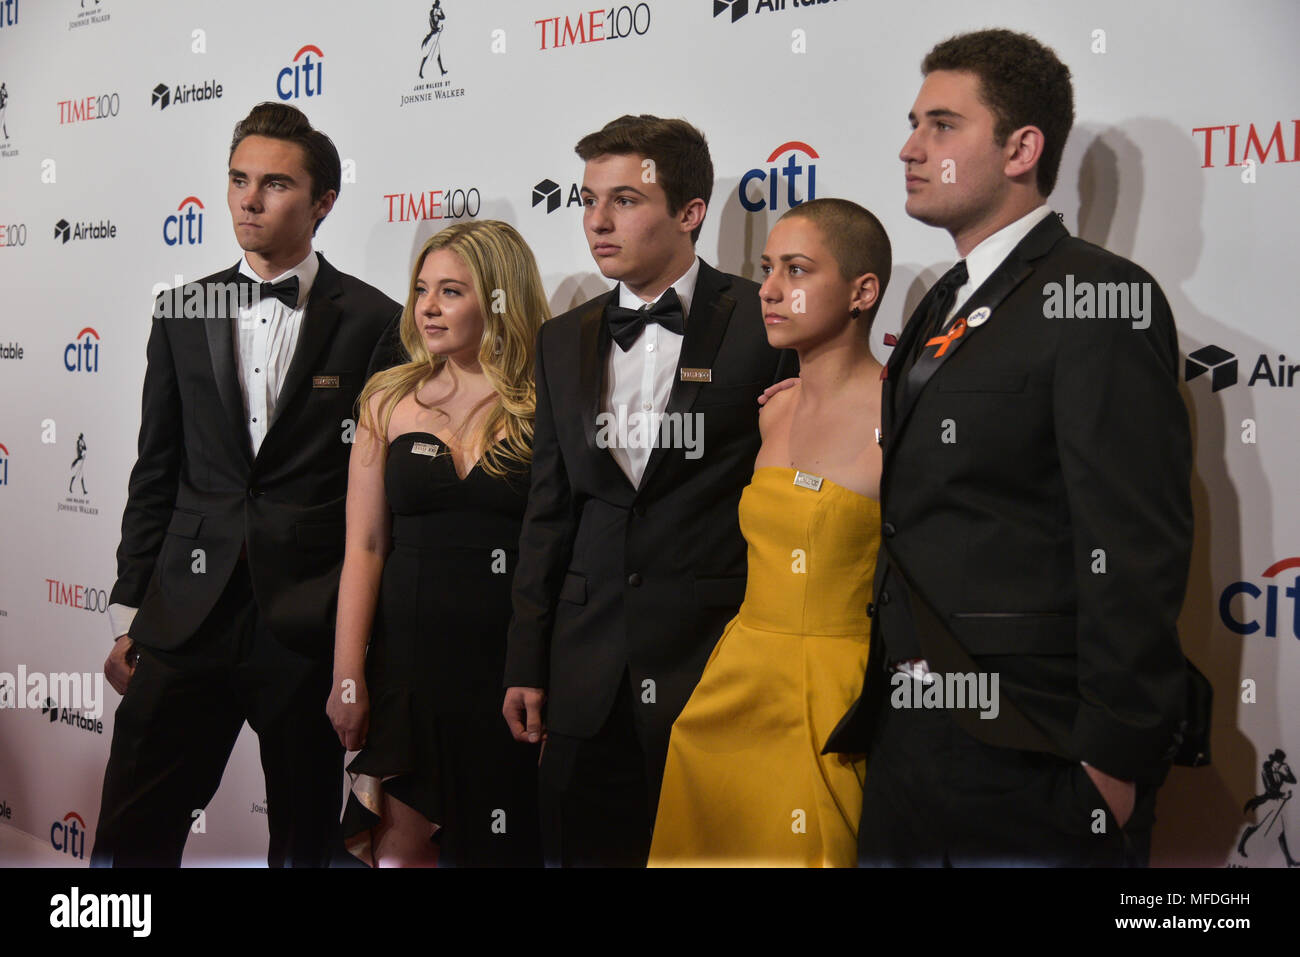 New York, USA. 24th Apr, 2018. David Hogg, Jaclyn Corin, Cameron Kasky, Emma Gonzalez and Alex Wind attend the 2018 Time 100 Gala at Jazz at Lincoln Center on April 24, 2018 in New York City. Credit: Erik Pendzich/Alamy Live News Stock Photo